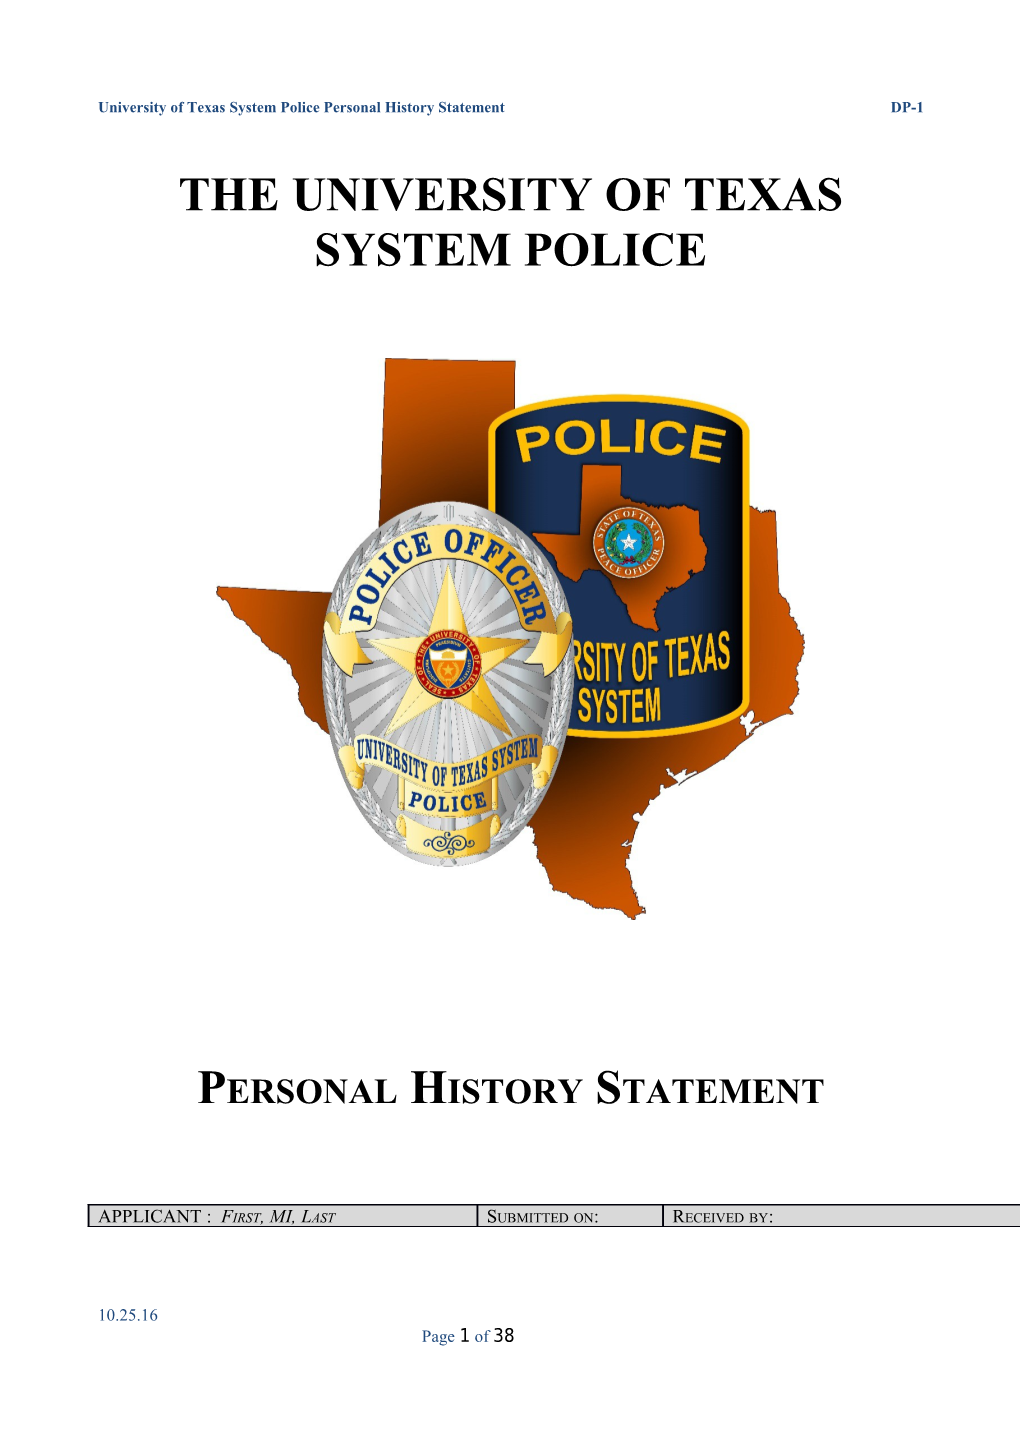 The University of Texas System Police